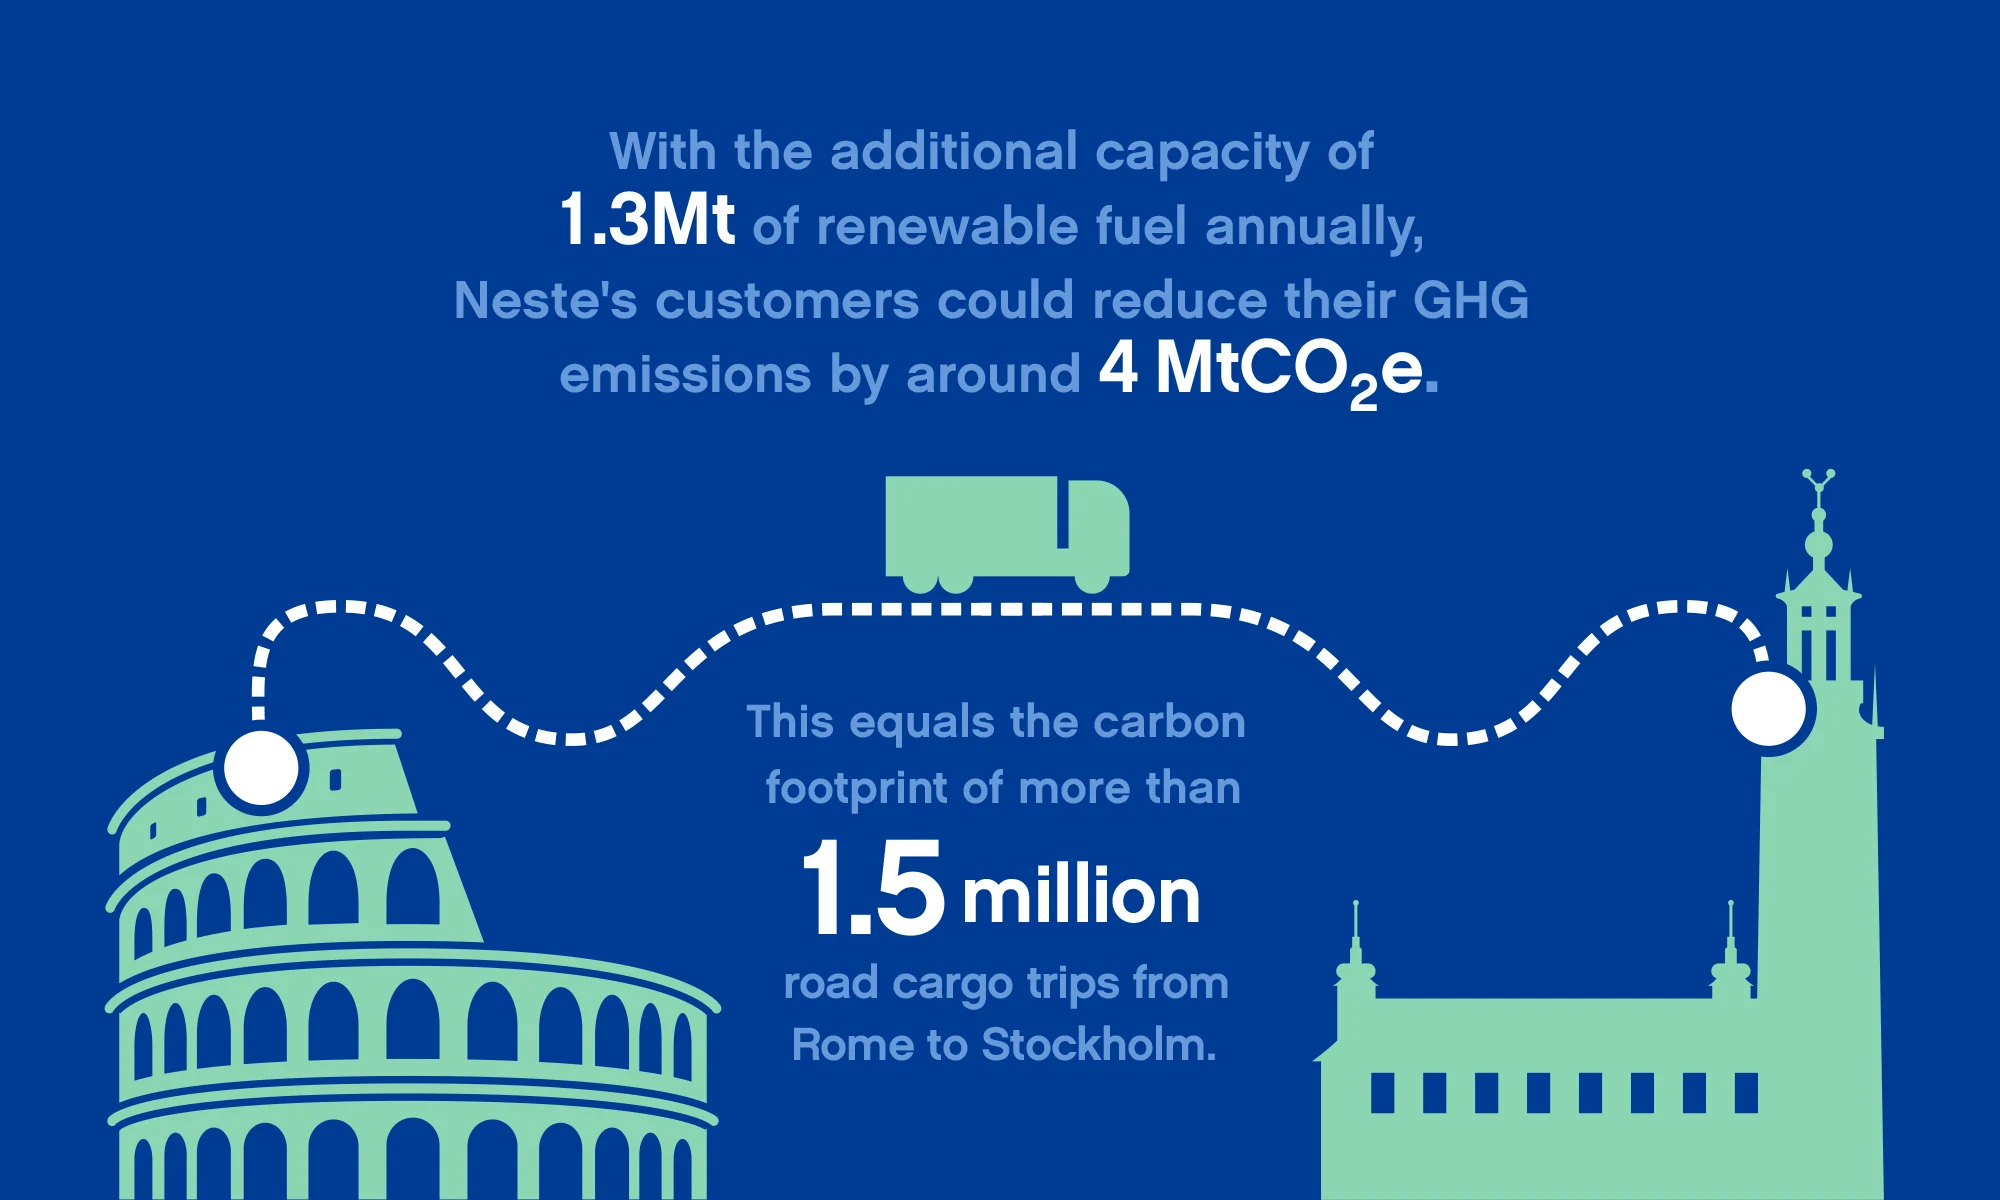 An infographic explaining the impact of Singapore refinery's additional renewable fuels capacity